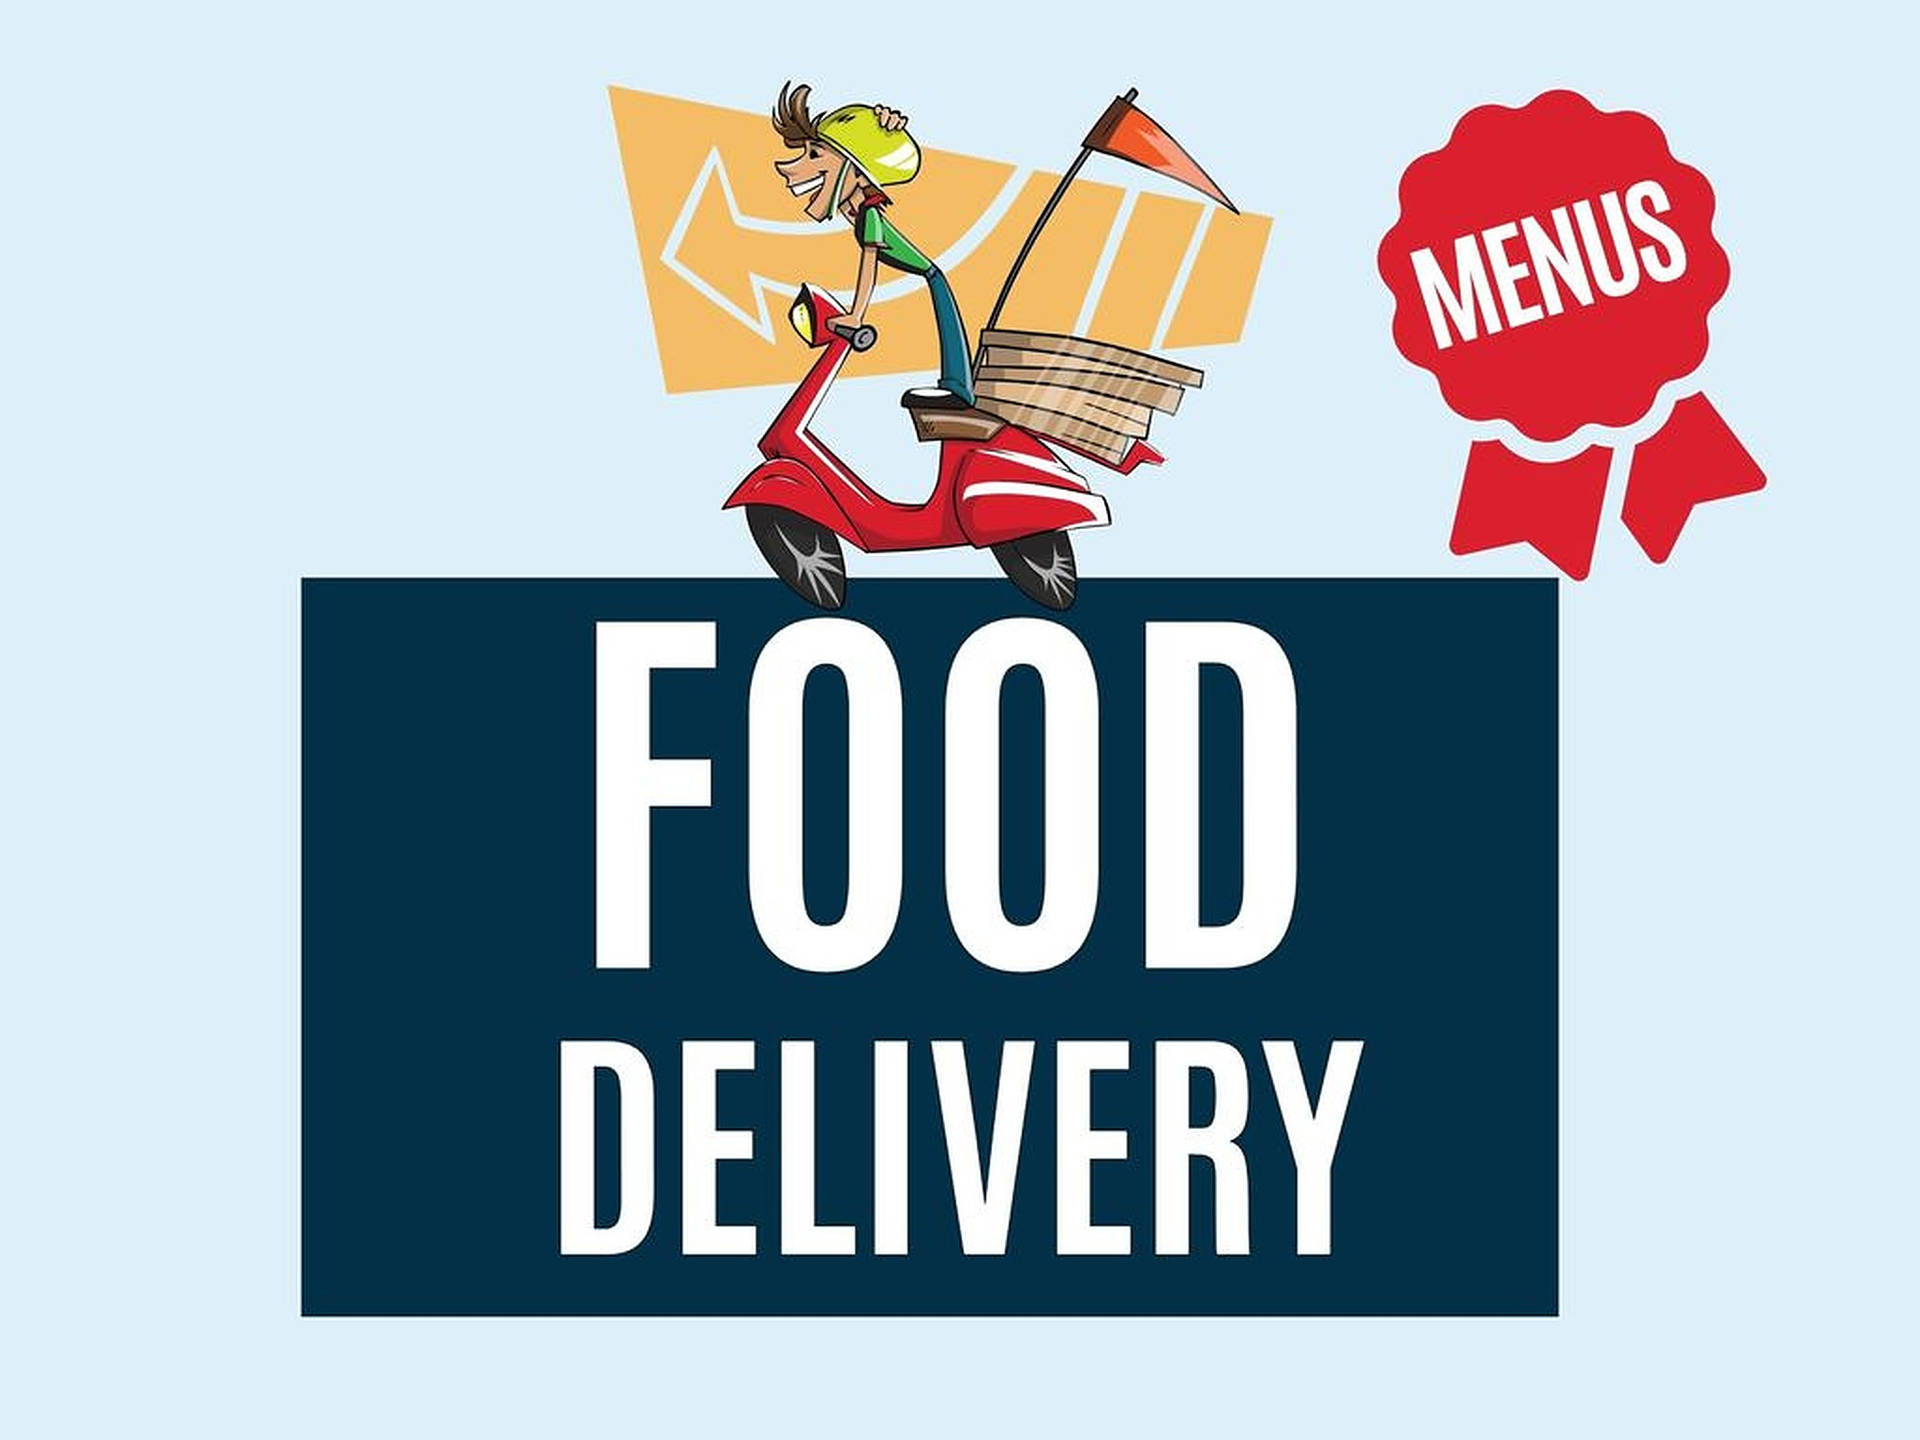 Food Delivery Courier Service Background